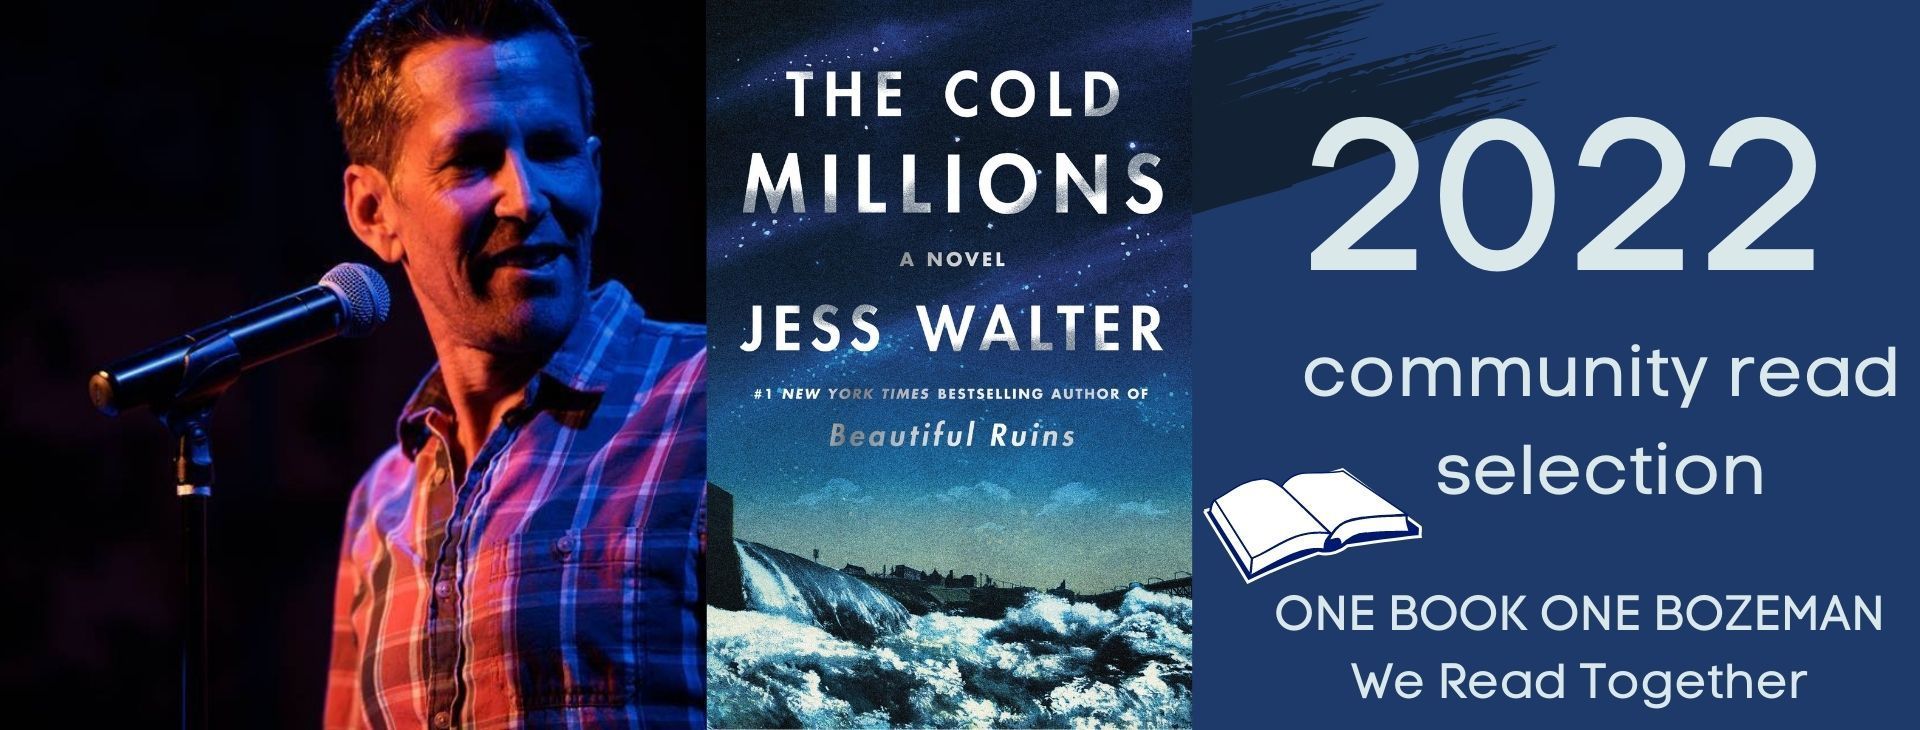 The Cold Millions by Jess Walter- Bozeman Public Library One Book One Bozeman 2022 Book Club meeting, Online Event